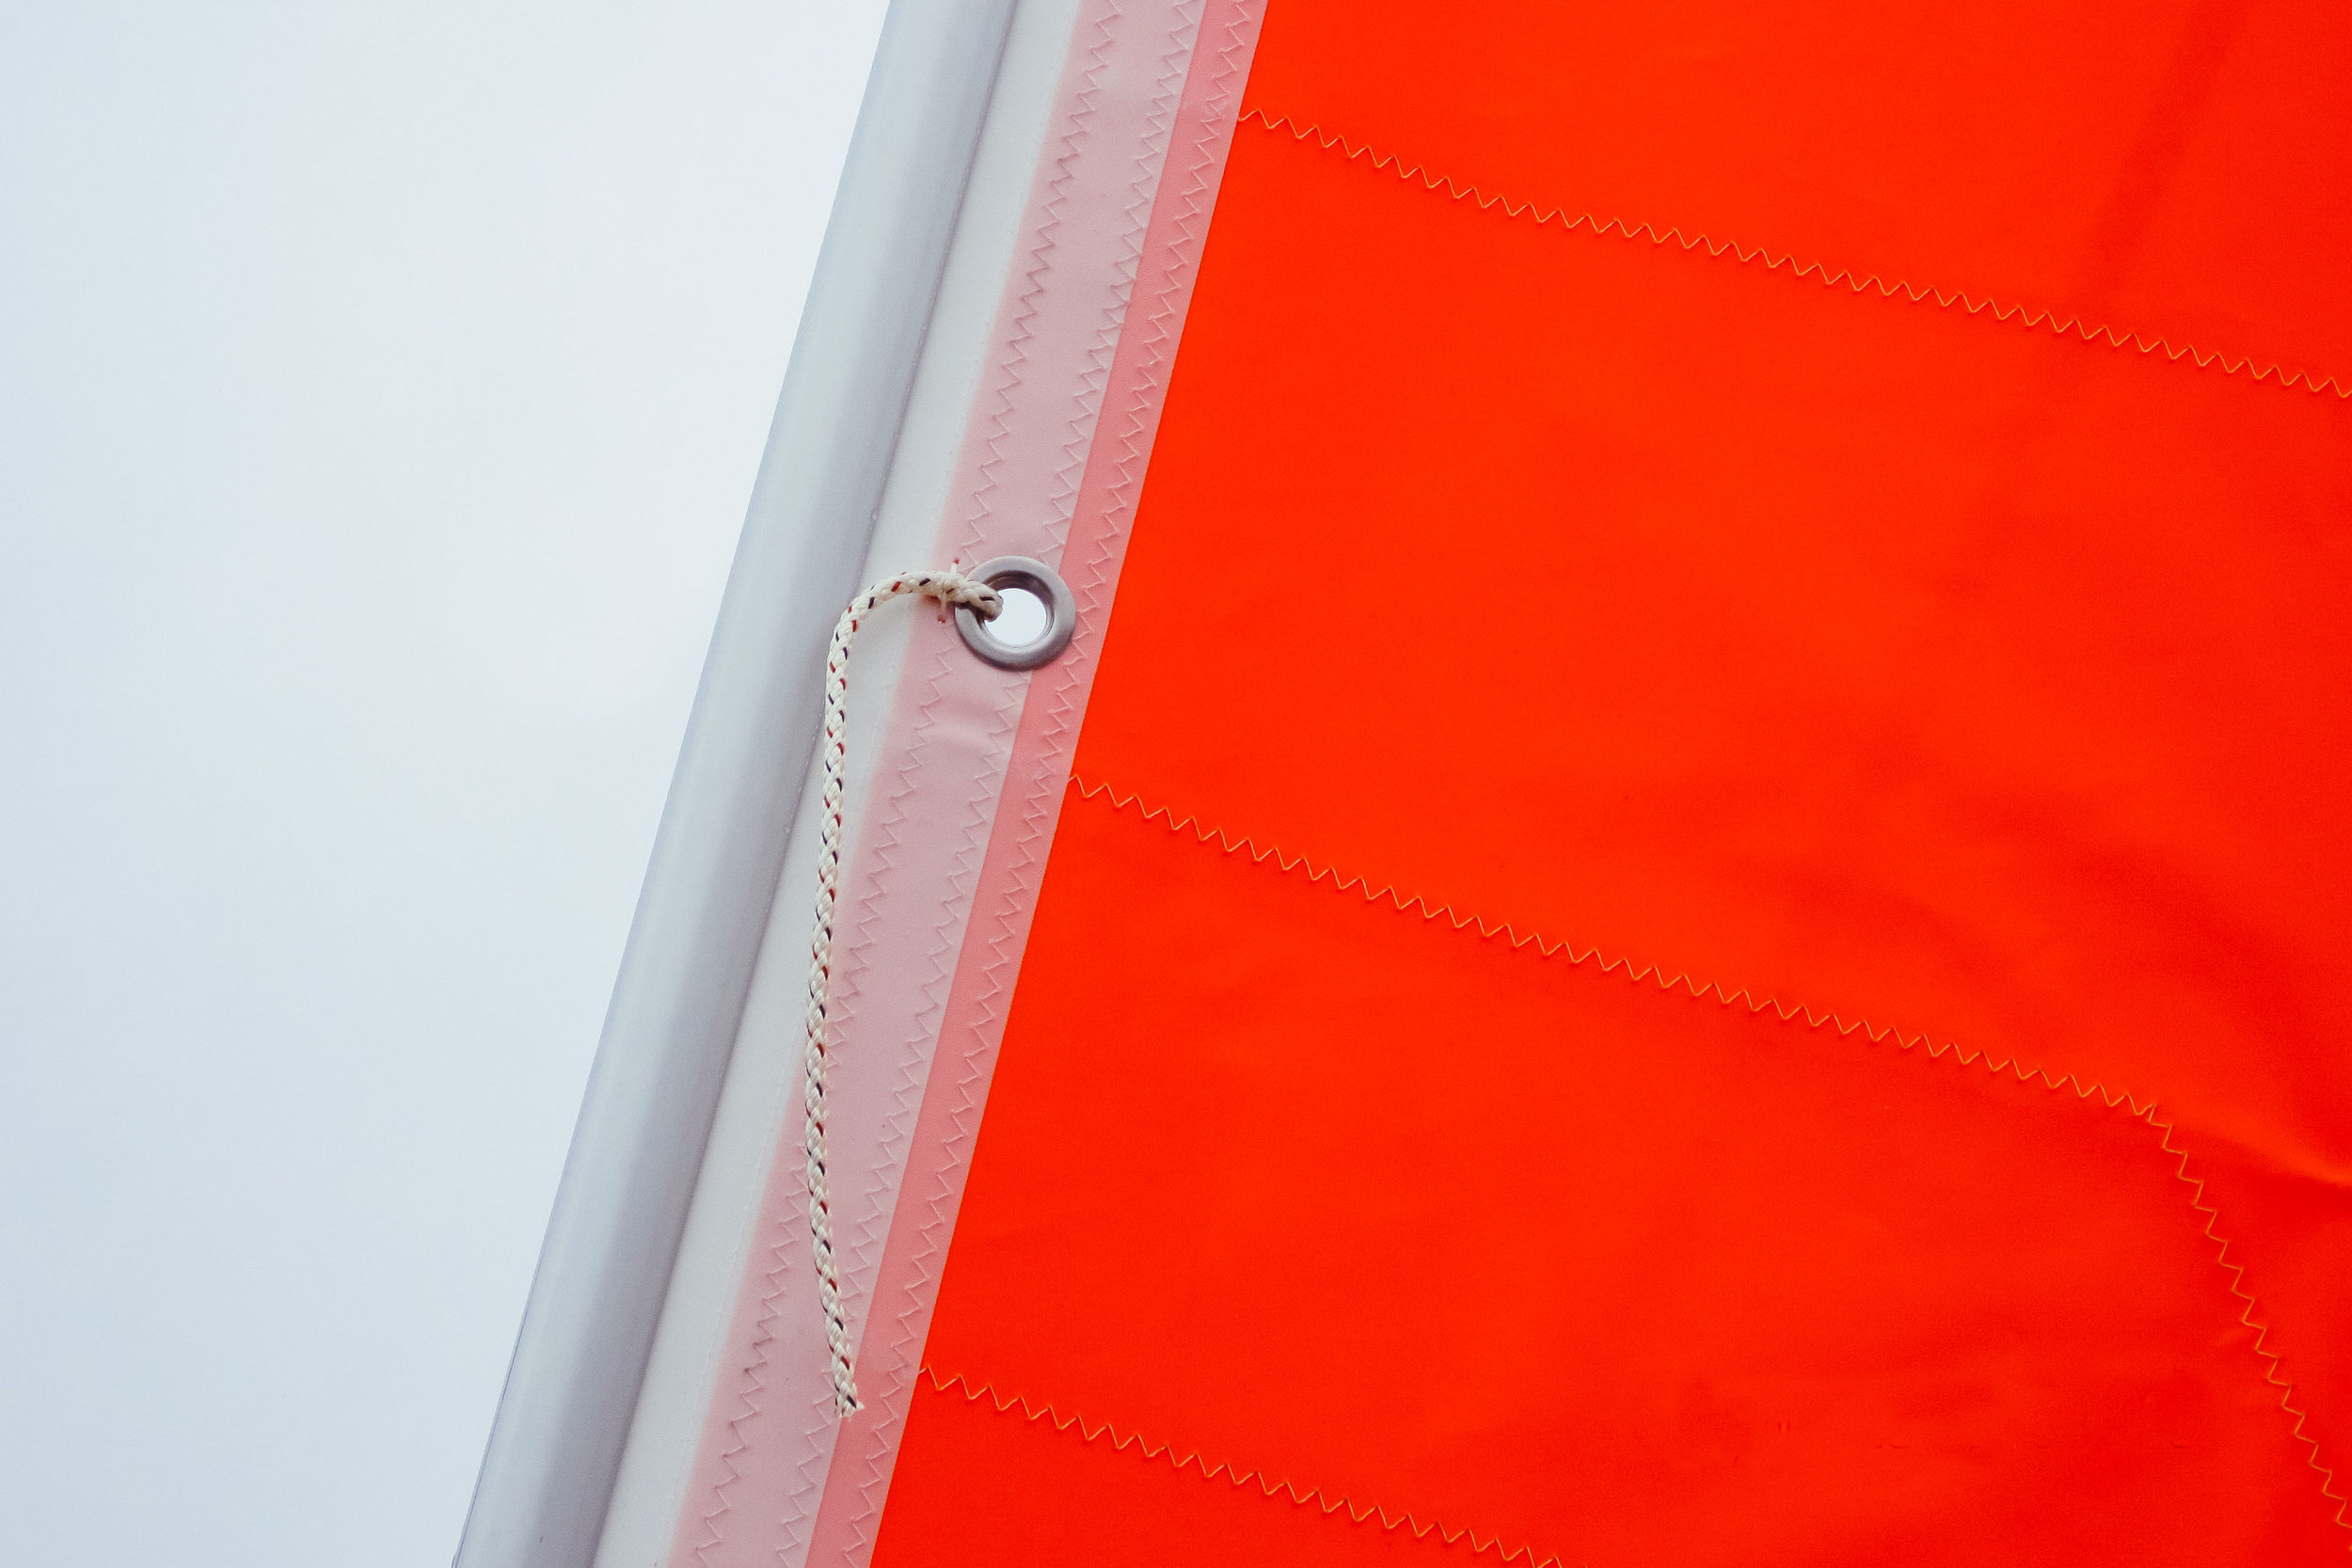 The most common alternate luff attachment is to tie around the headstay. The ties have to be permanently attached to the sail.